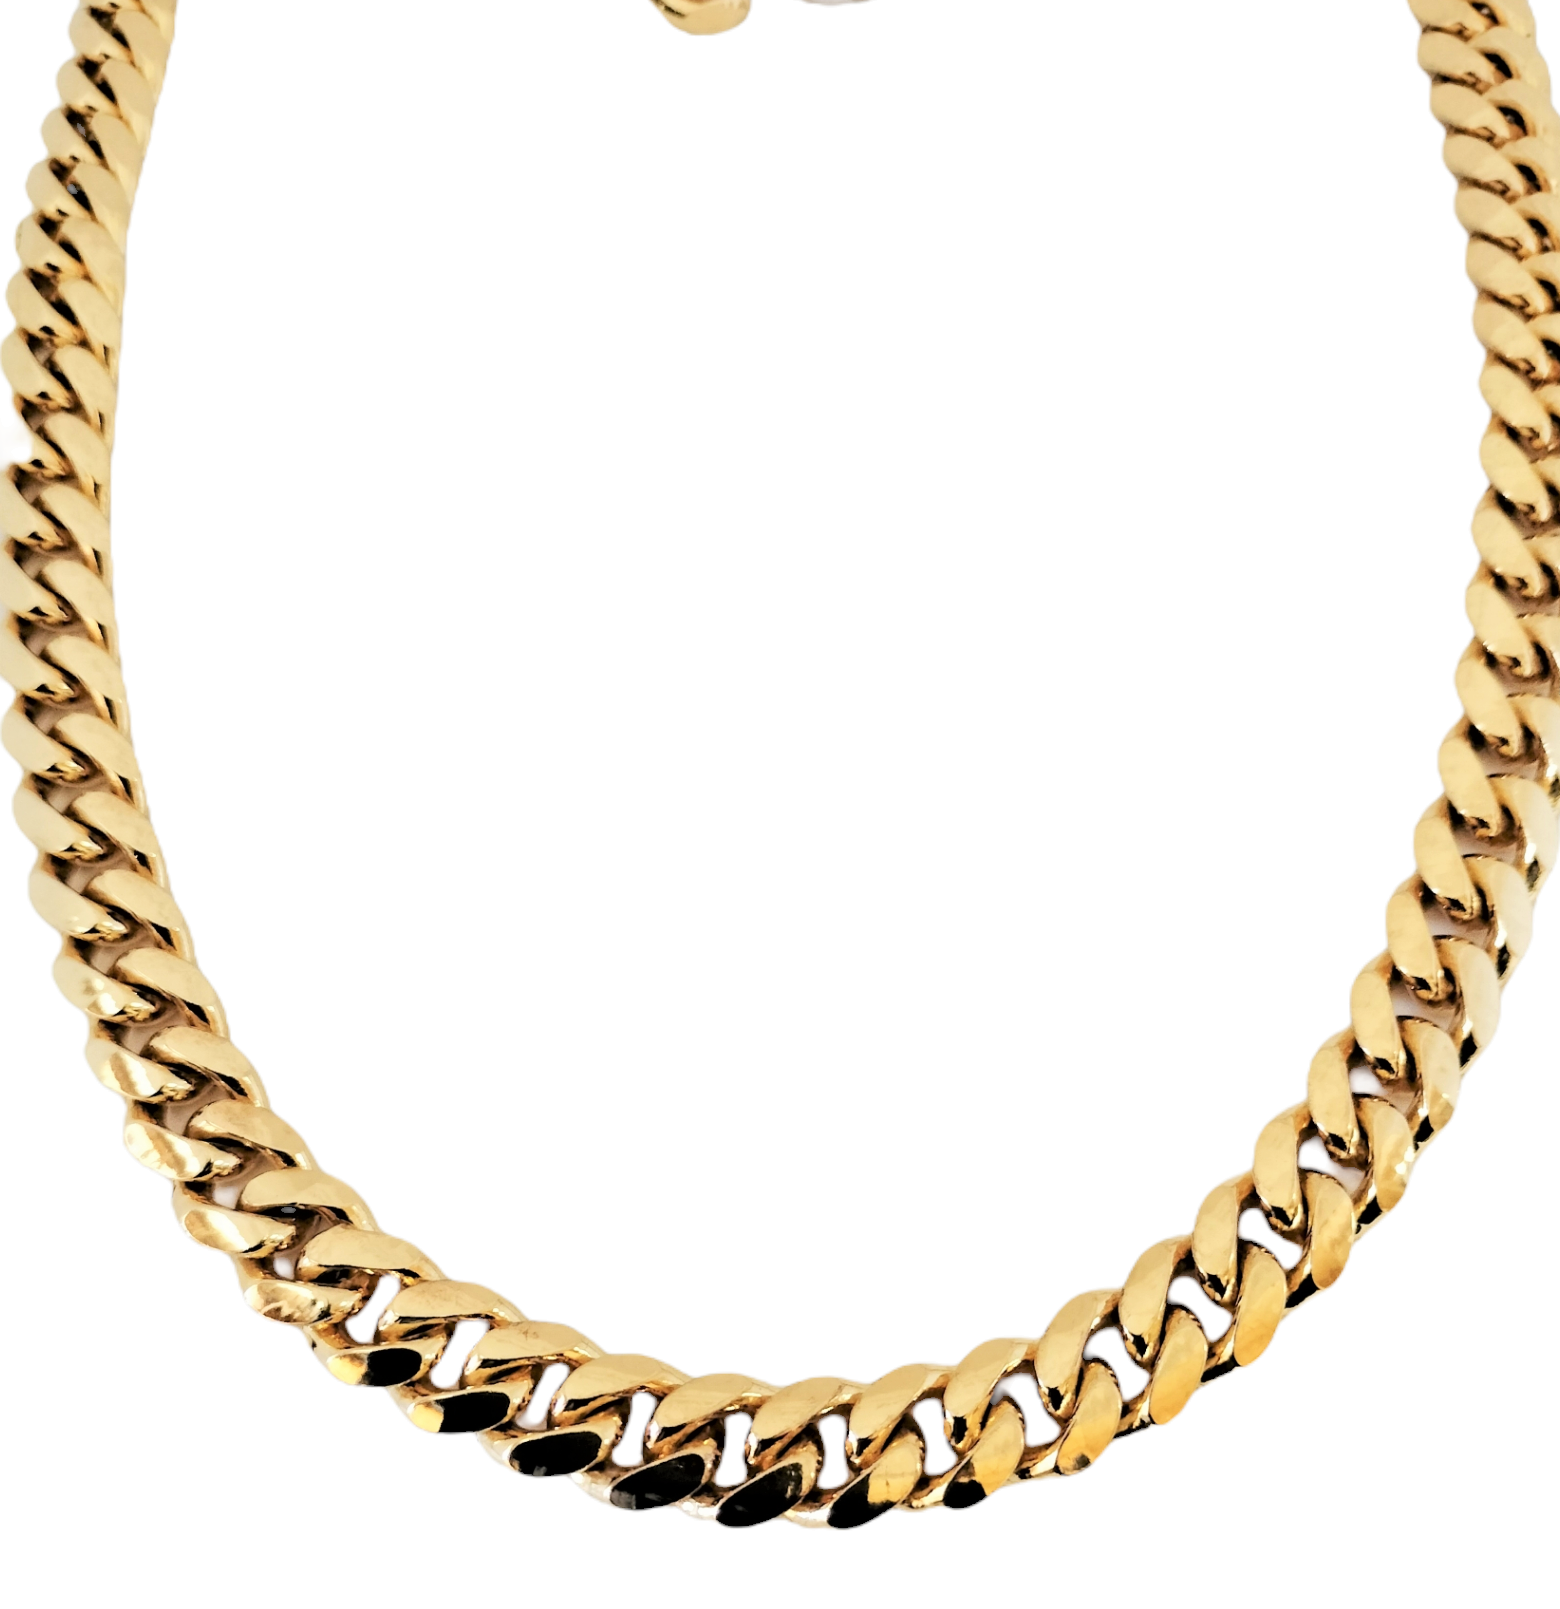 Buy Gold Plated Charm Men Necklace@ Best Price